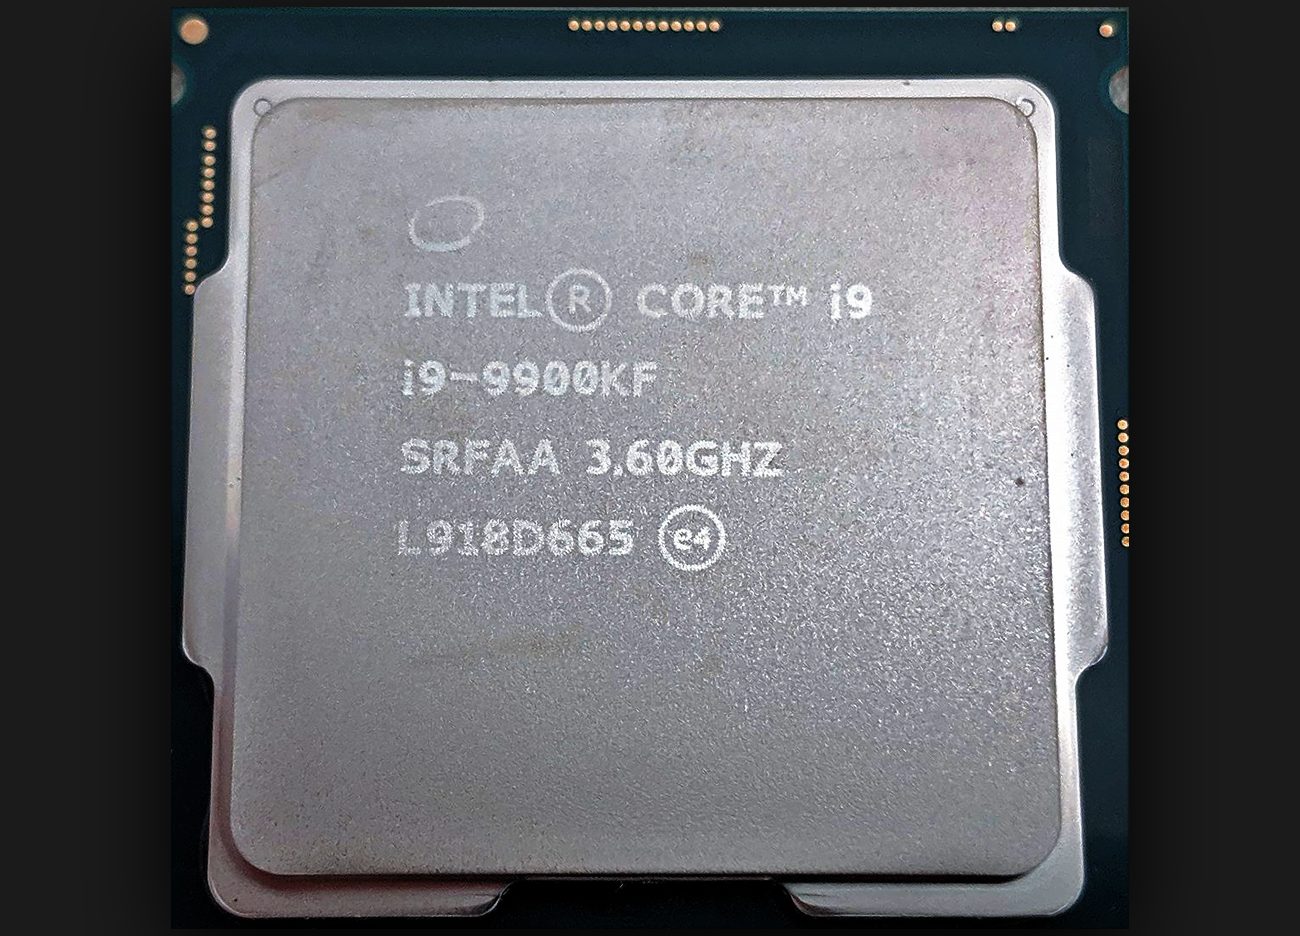 Intel Core i9 9900KF CPU Review - The FPS Review